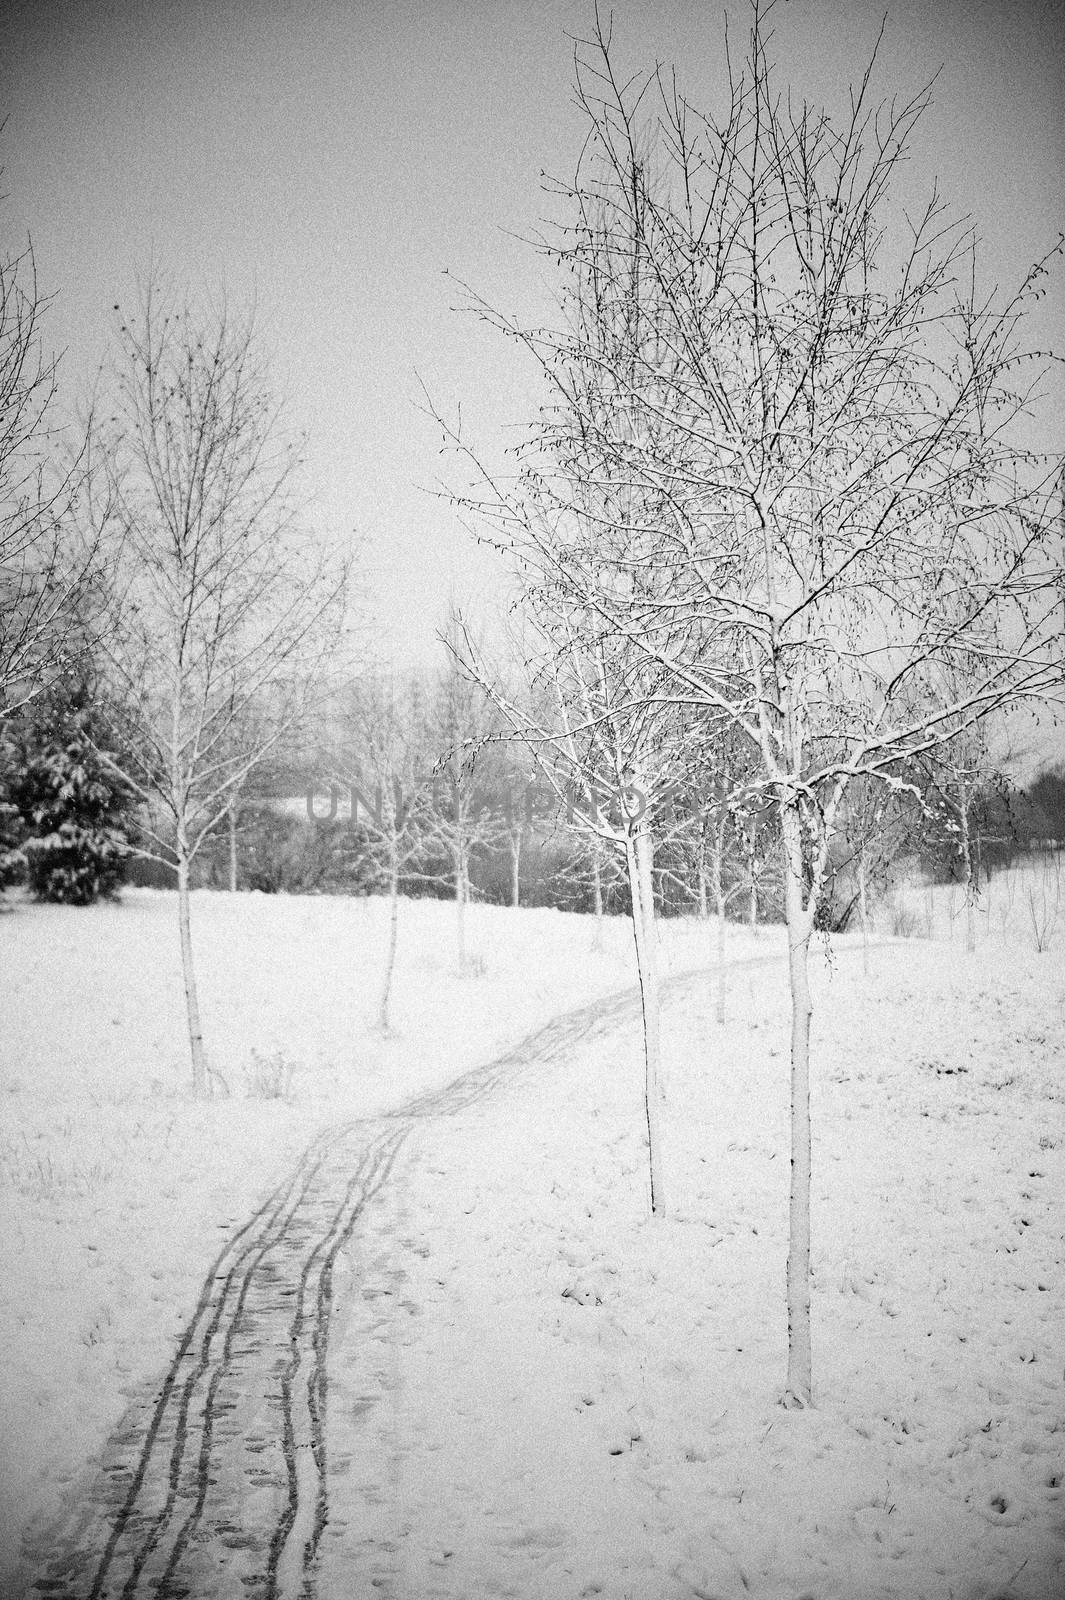 Vertical black and white landscape of a snowy trail running through frost covered winter park.